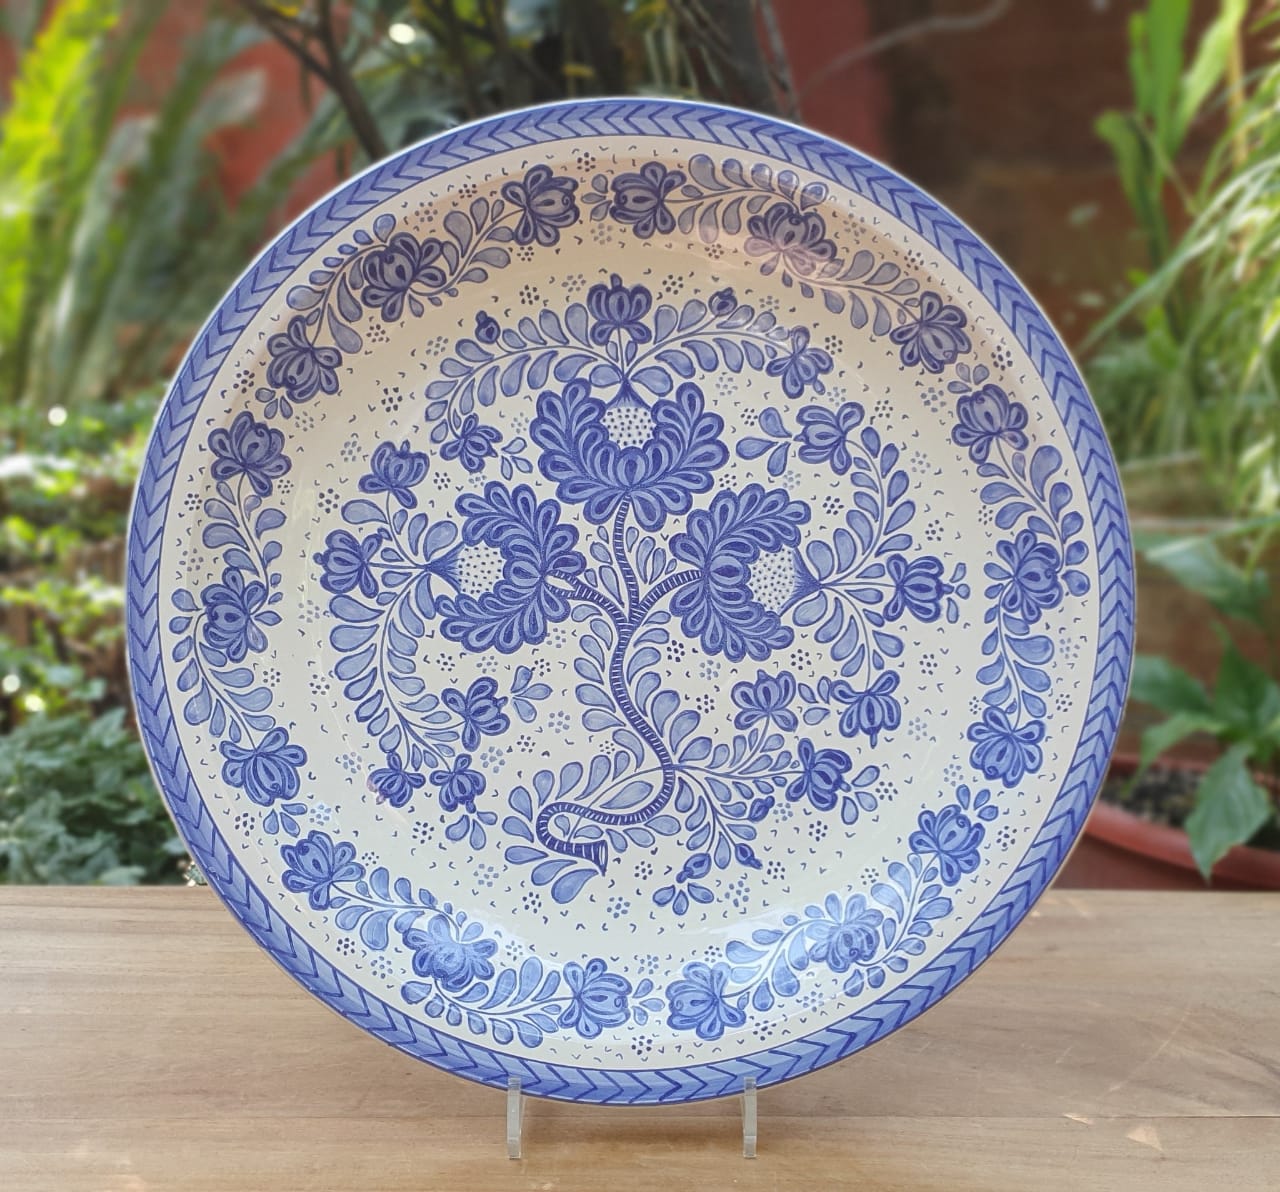 Decorative Platters Little Flower Pattern Blue and White